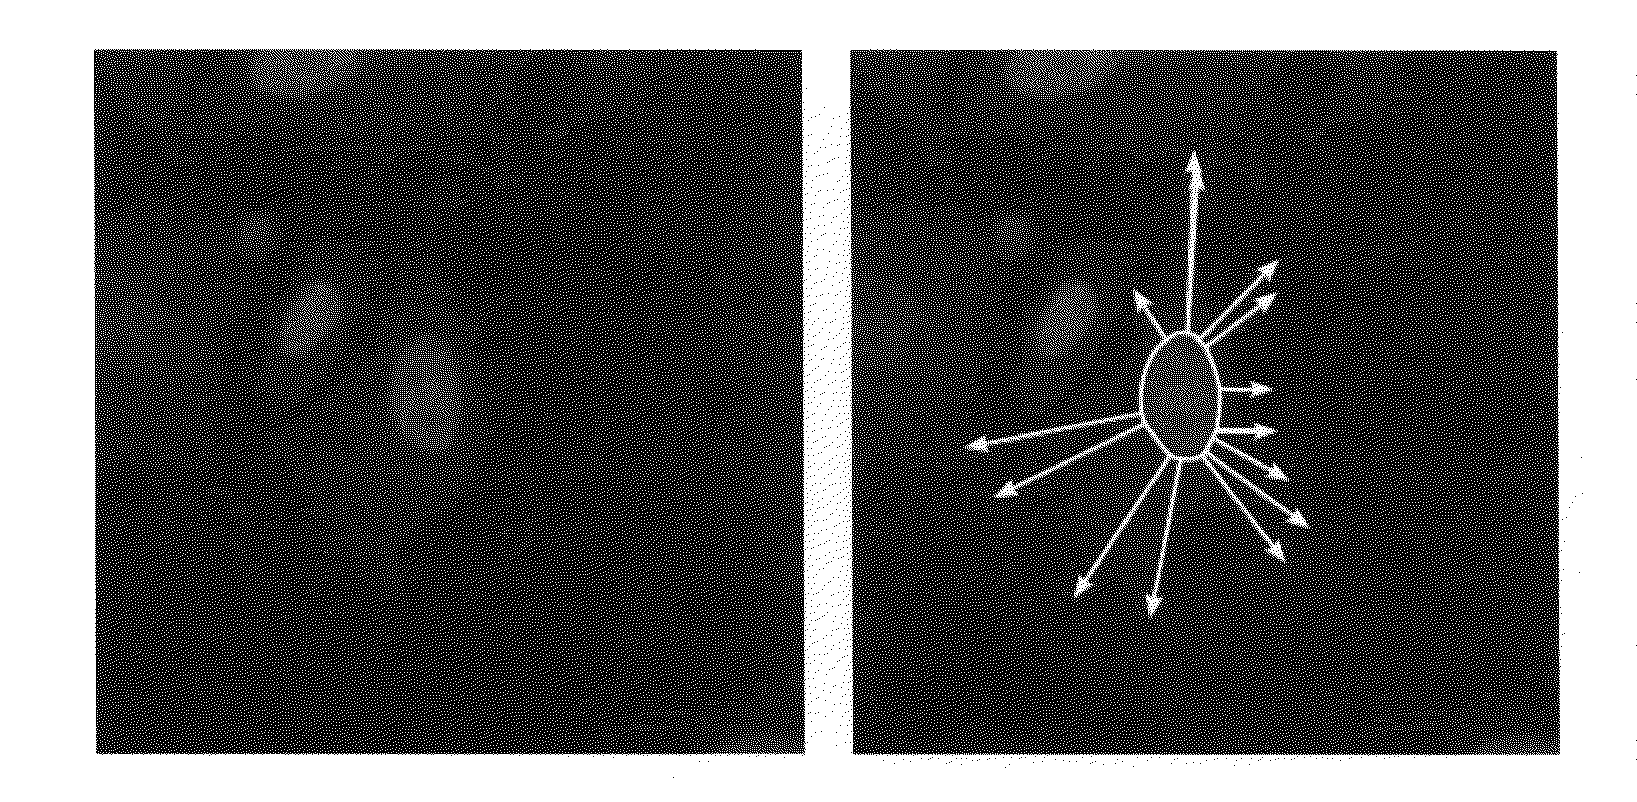 Method for Detecting Contours in Images of Biological Cells